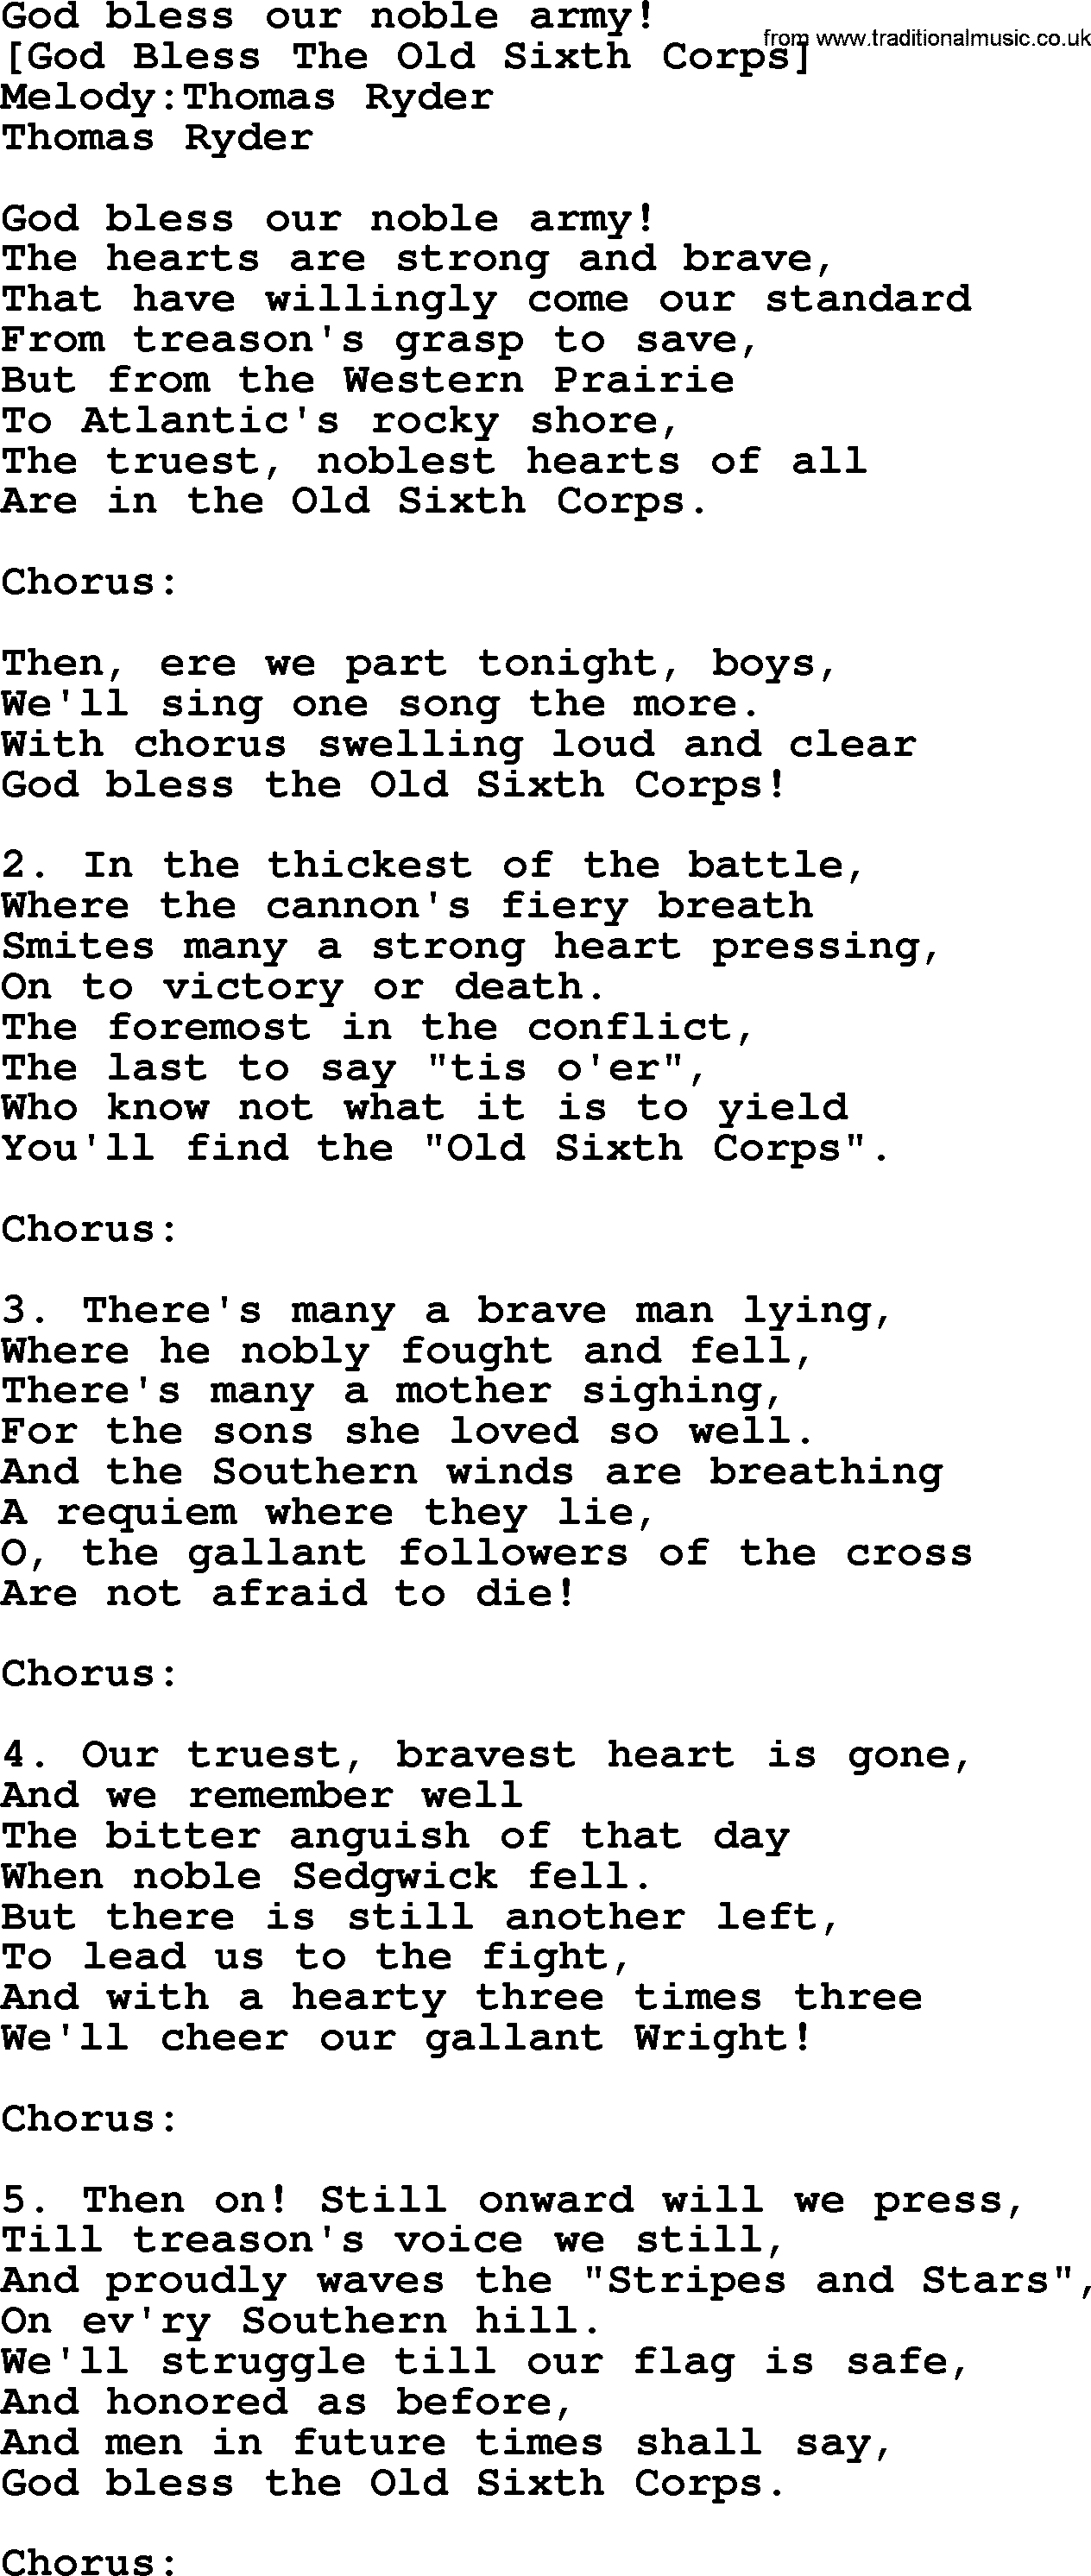 Old American Song: God Bless Our Noble Army!, lyrics